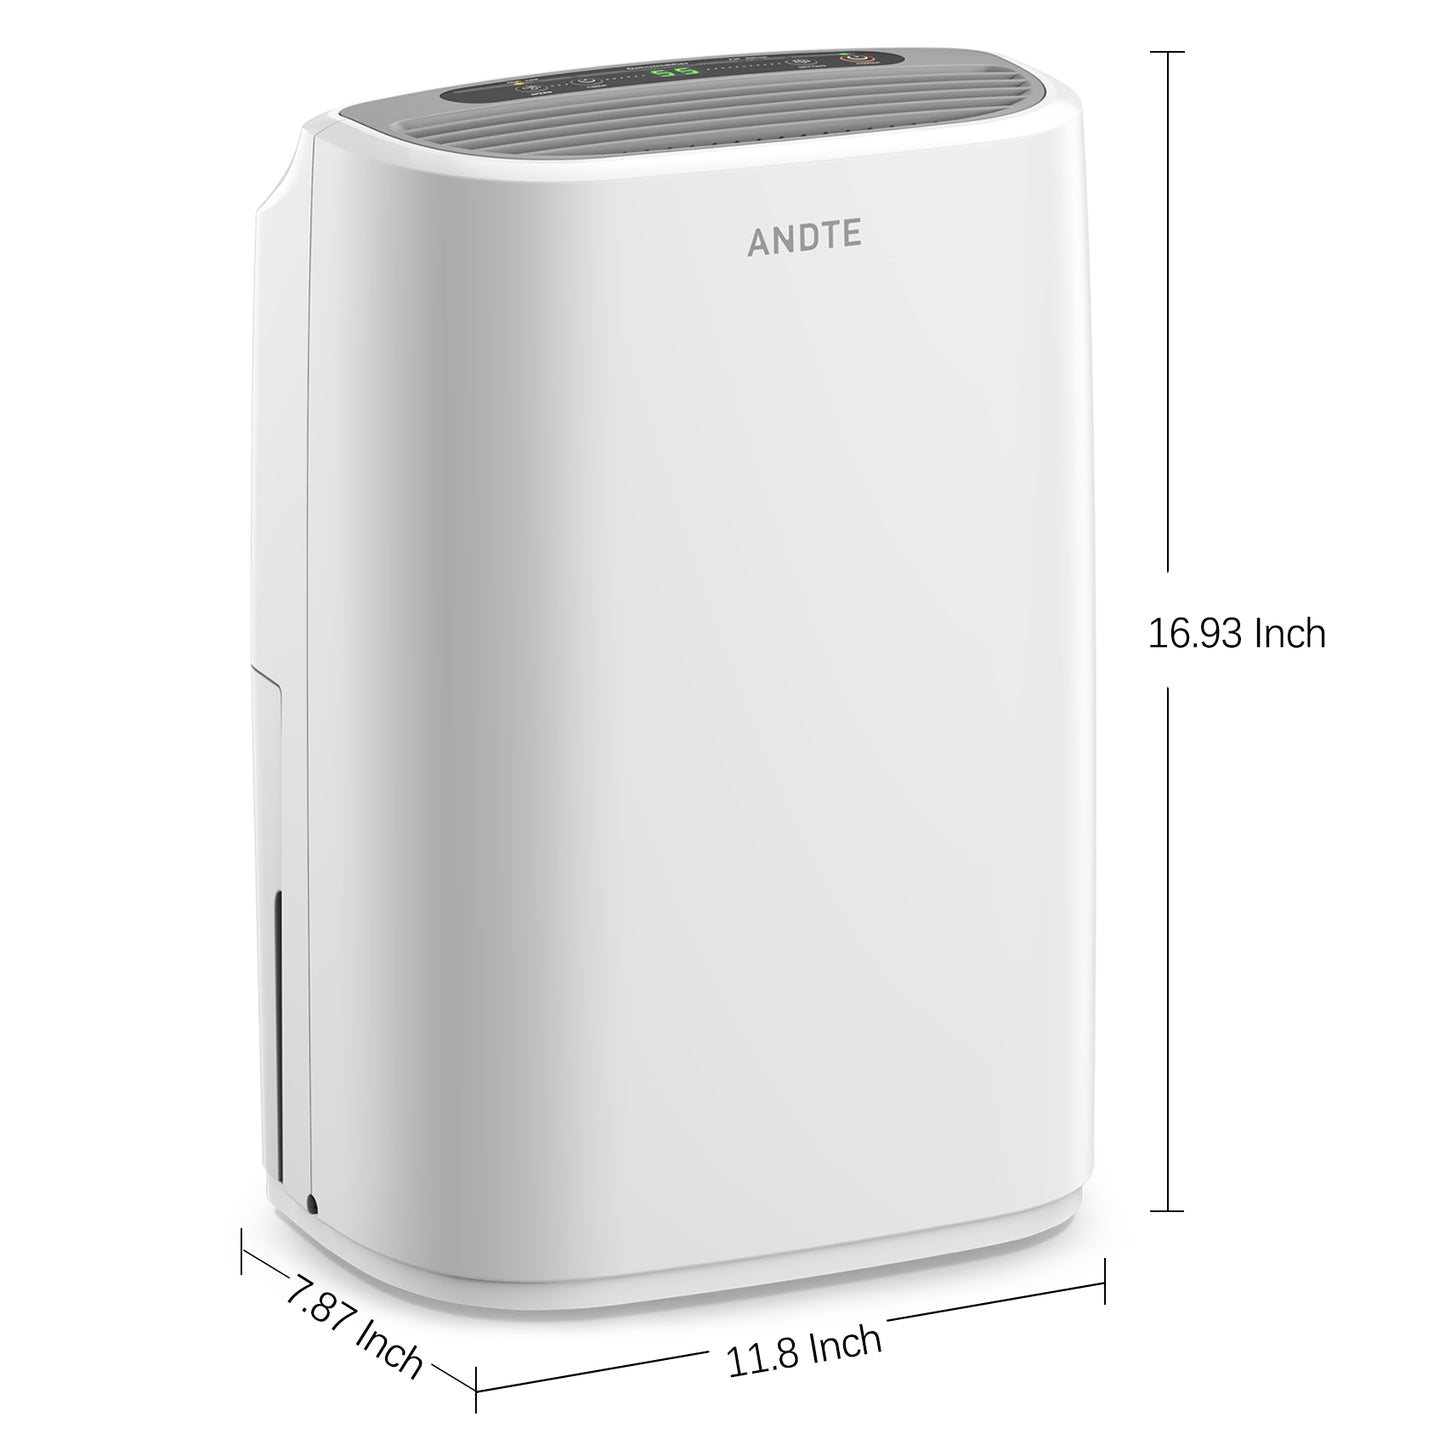 ANDTE 31 Pints Home Dehumidifier for Basements with Drain Hose, Covers up to 400 Sq Ft